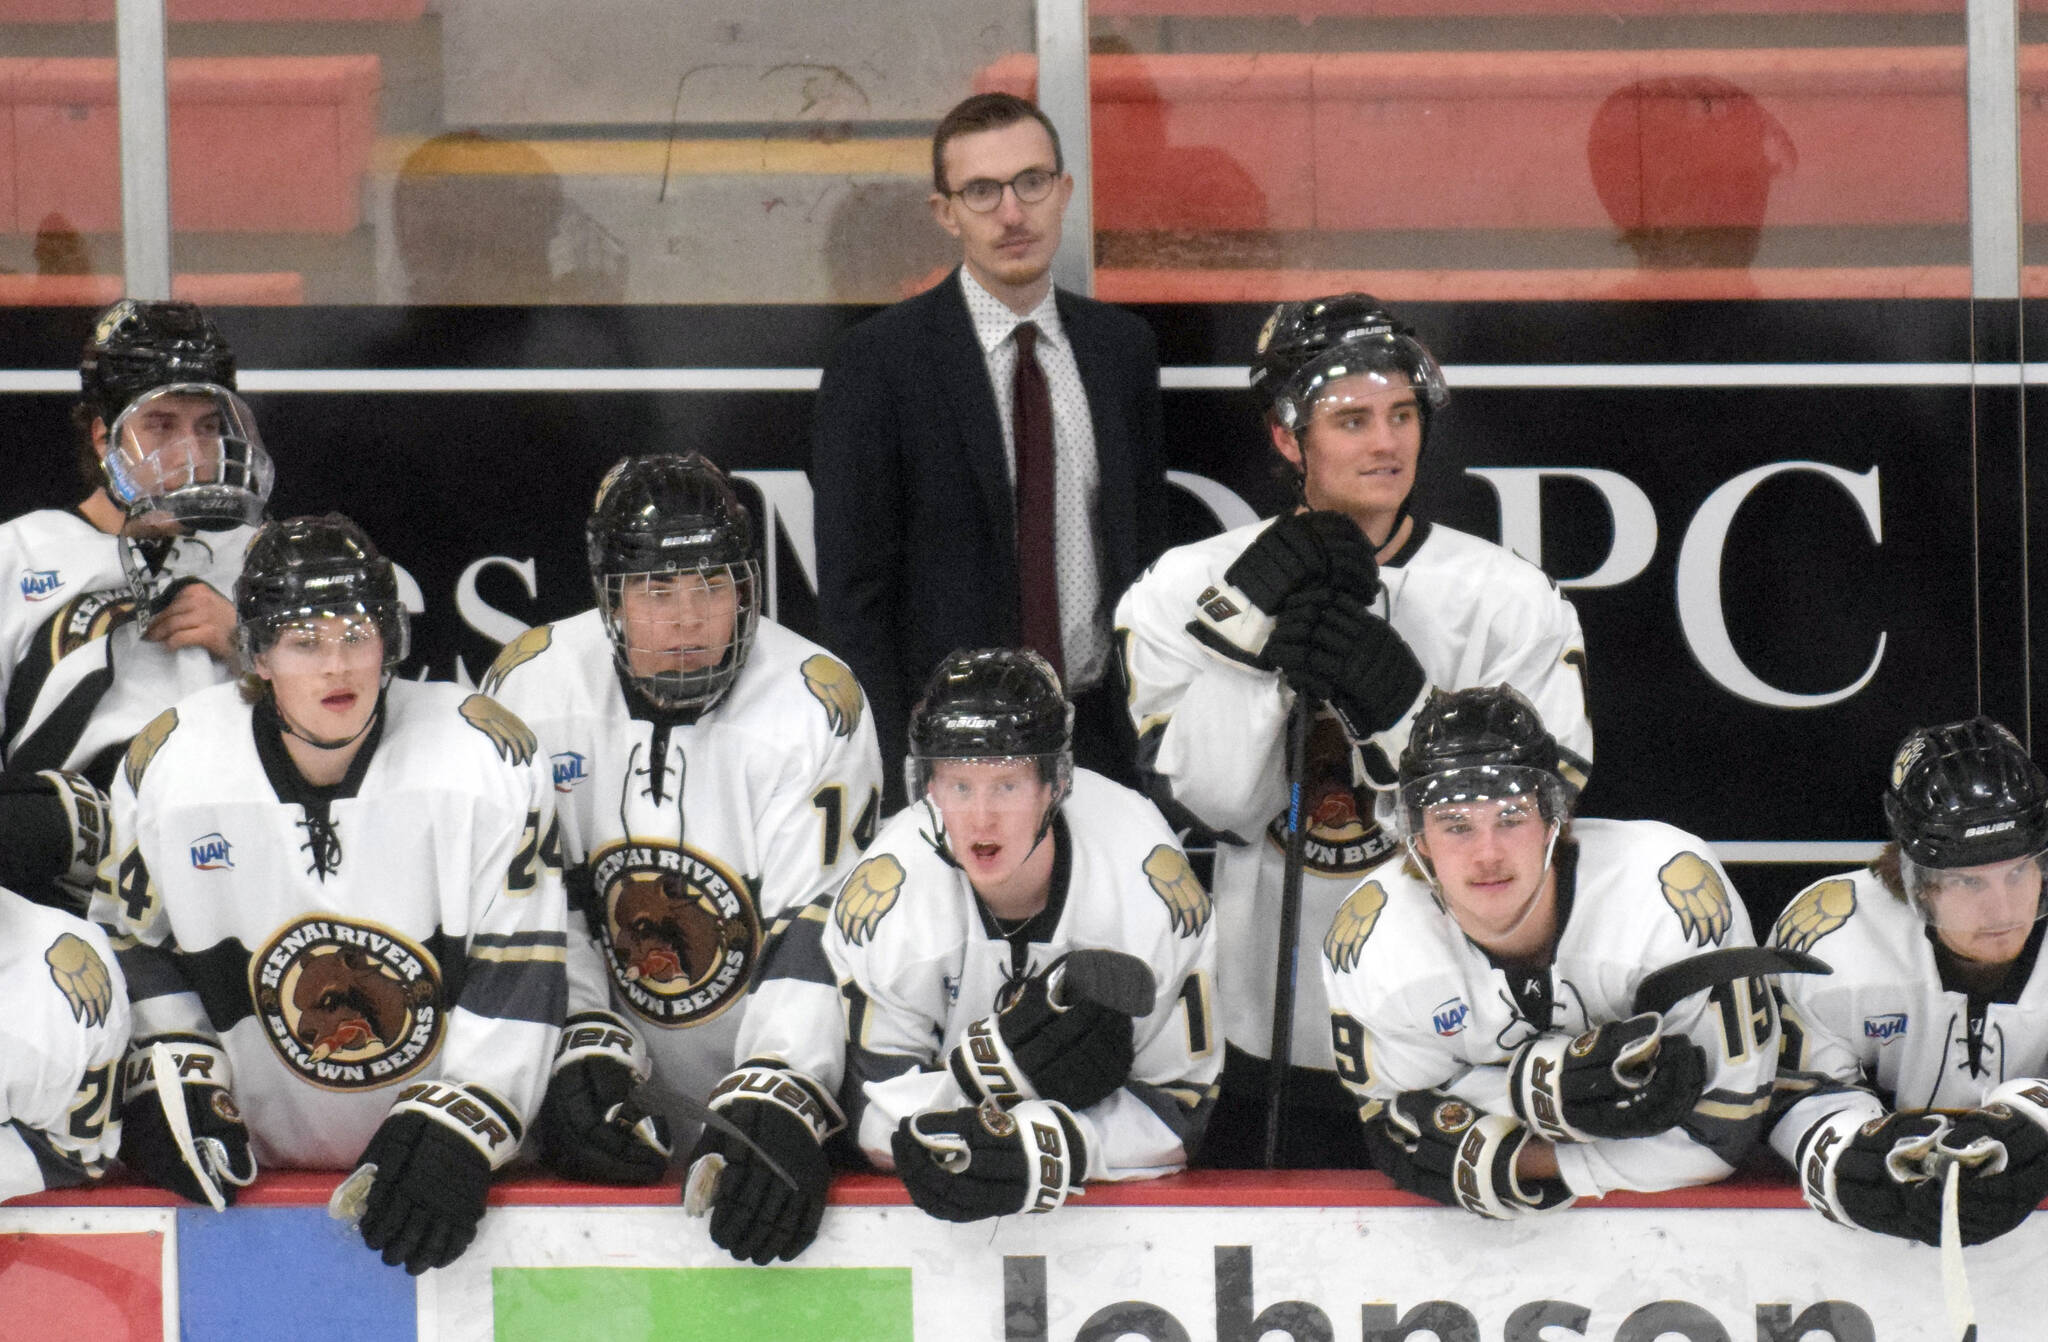 Assistant coach Taylor Shaw leads the Kenai River Brown Bears during a game Thursday, Nov. 18, 2021, against the Springfield (Illinois) Jr. Blues at the Soldotna Regional Sports Complex in Soldotna, Alaska. (Photo by Jeff Helminiak/Peninsula Clarion)